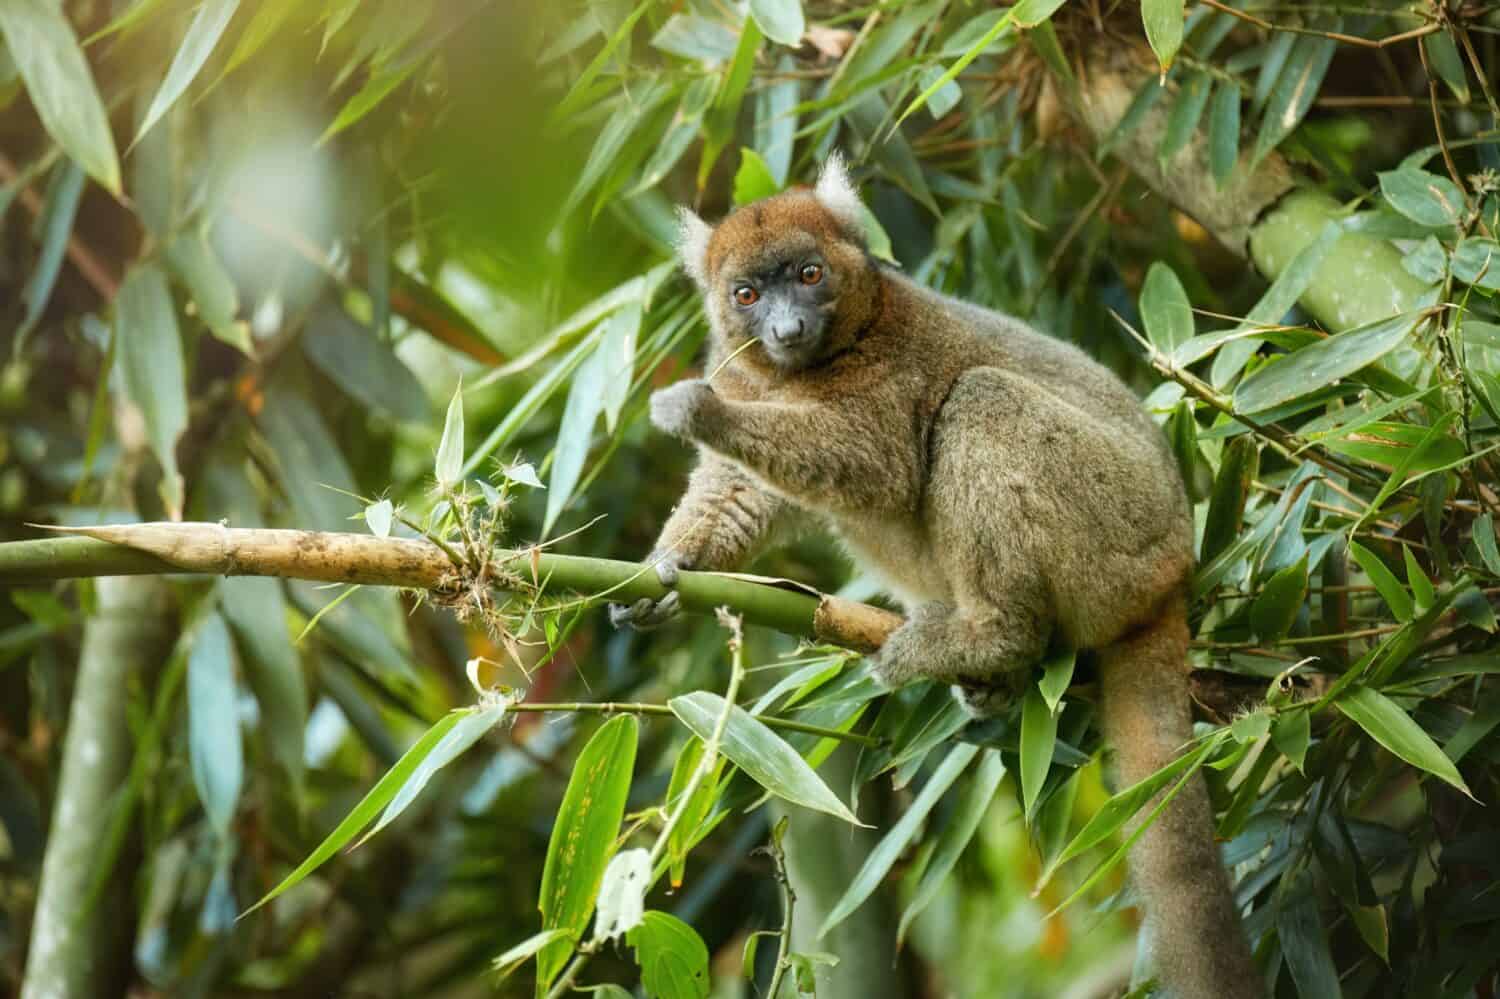 Greater bamboo lemur, Hapalemur simus, one of the world's most critically endangered primates, in dense forest of Ranomafana national park, feeds on bamboo leaves. Lemur conservancy in Madagascar.  